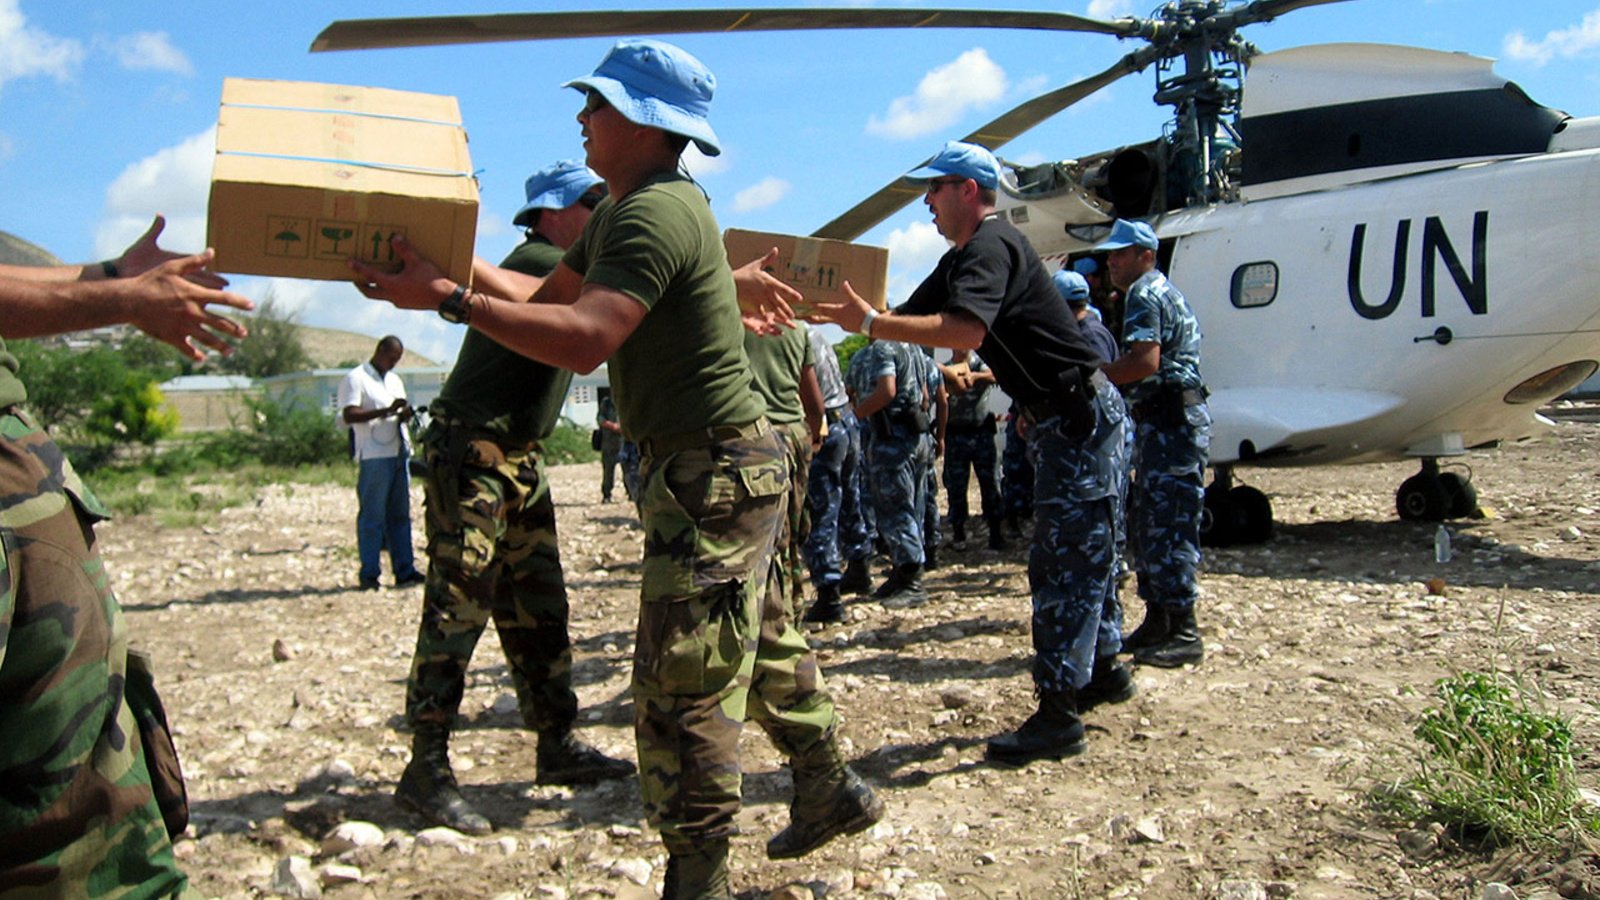 UN aid workers forming a line to unload the helicopter aid cargo.